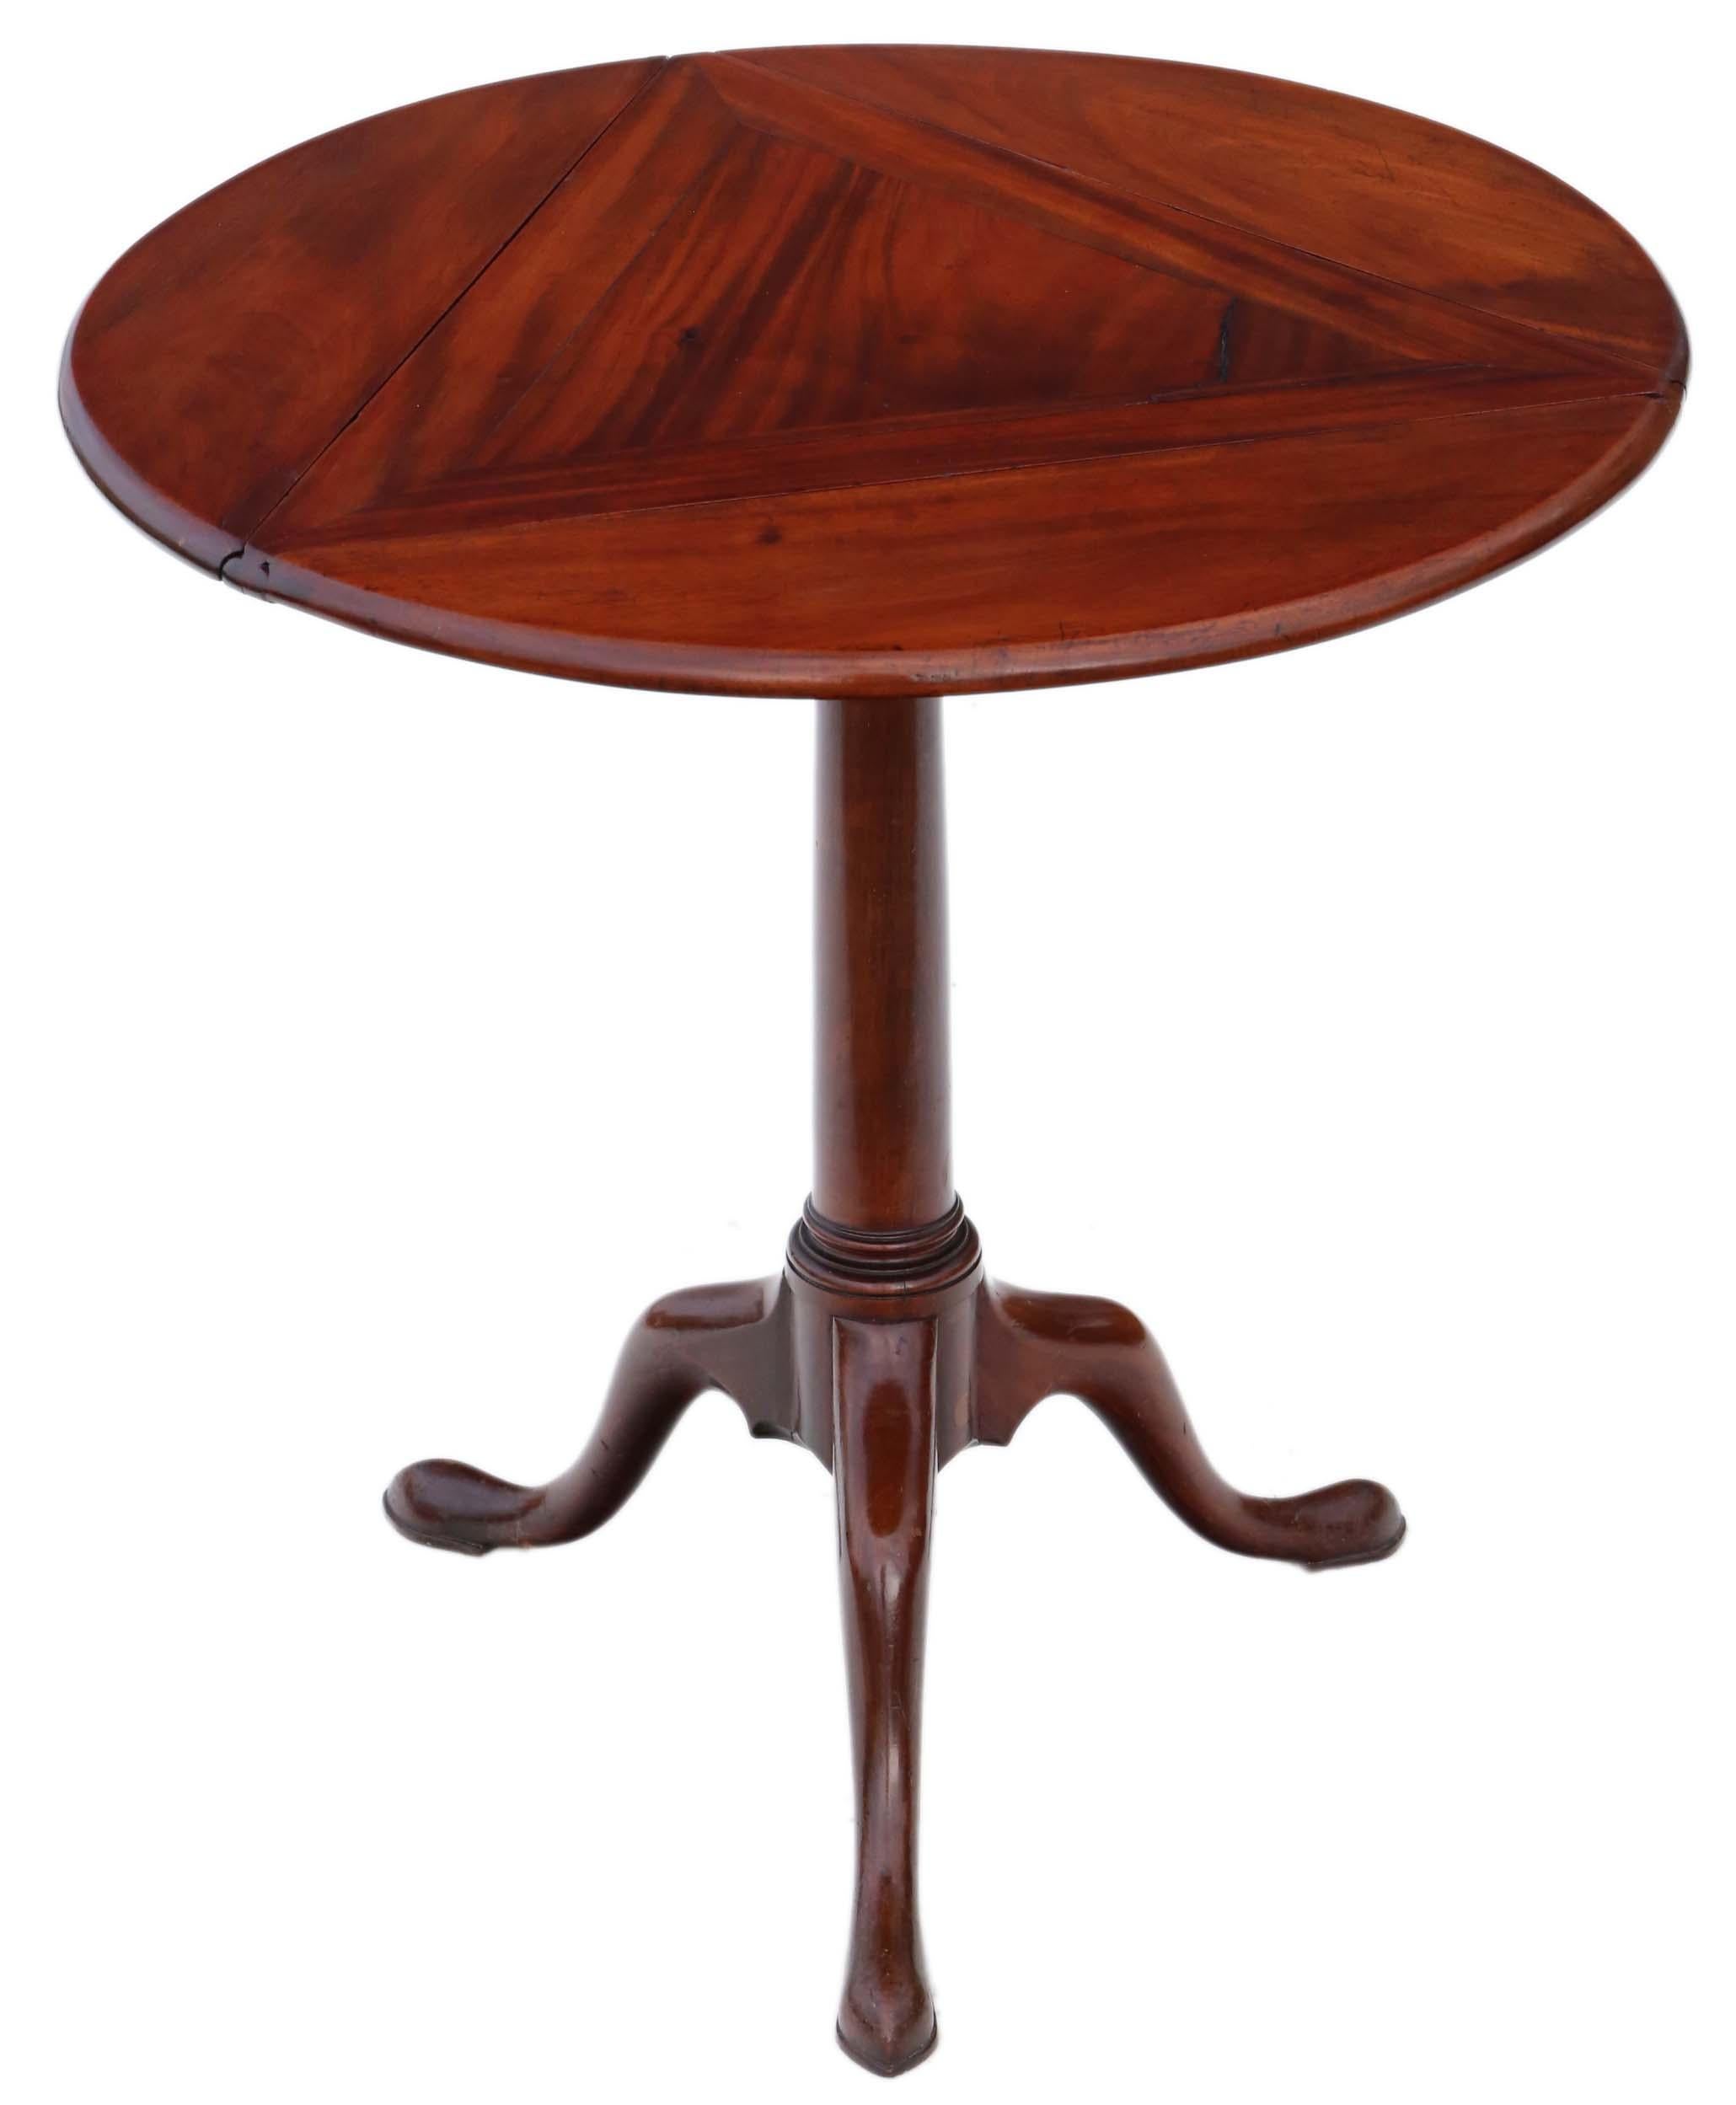 Antique Georgian mahogany folding wine side or supper table, circa 1820. A rare quality item.
Solid with no loose joints. A charming table that is full of age, character and charm.
A very rare and unusual find with a lovely tapered gun barrel